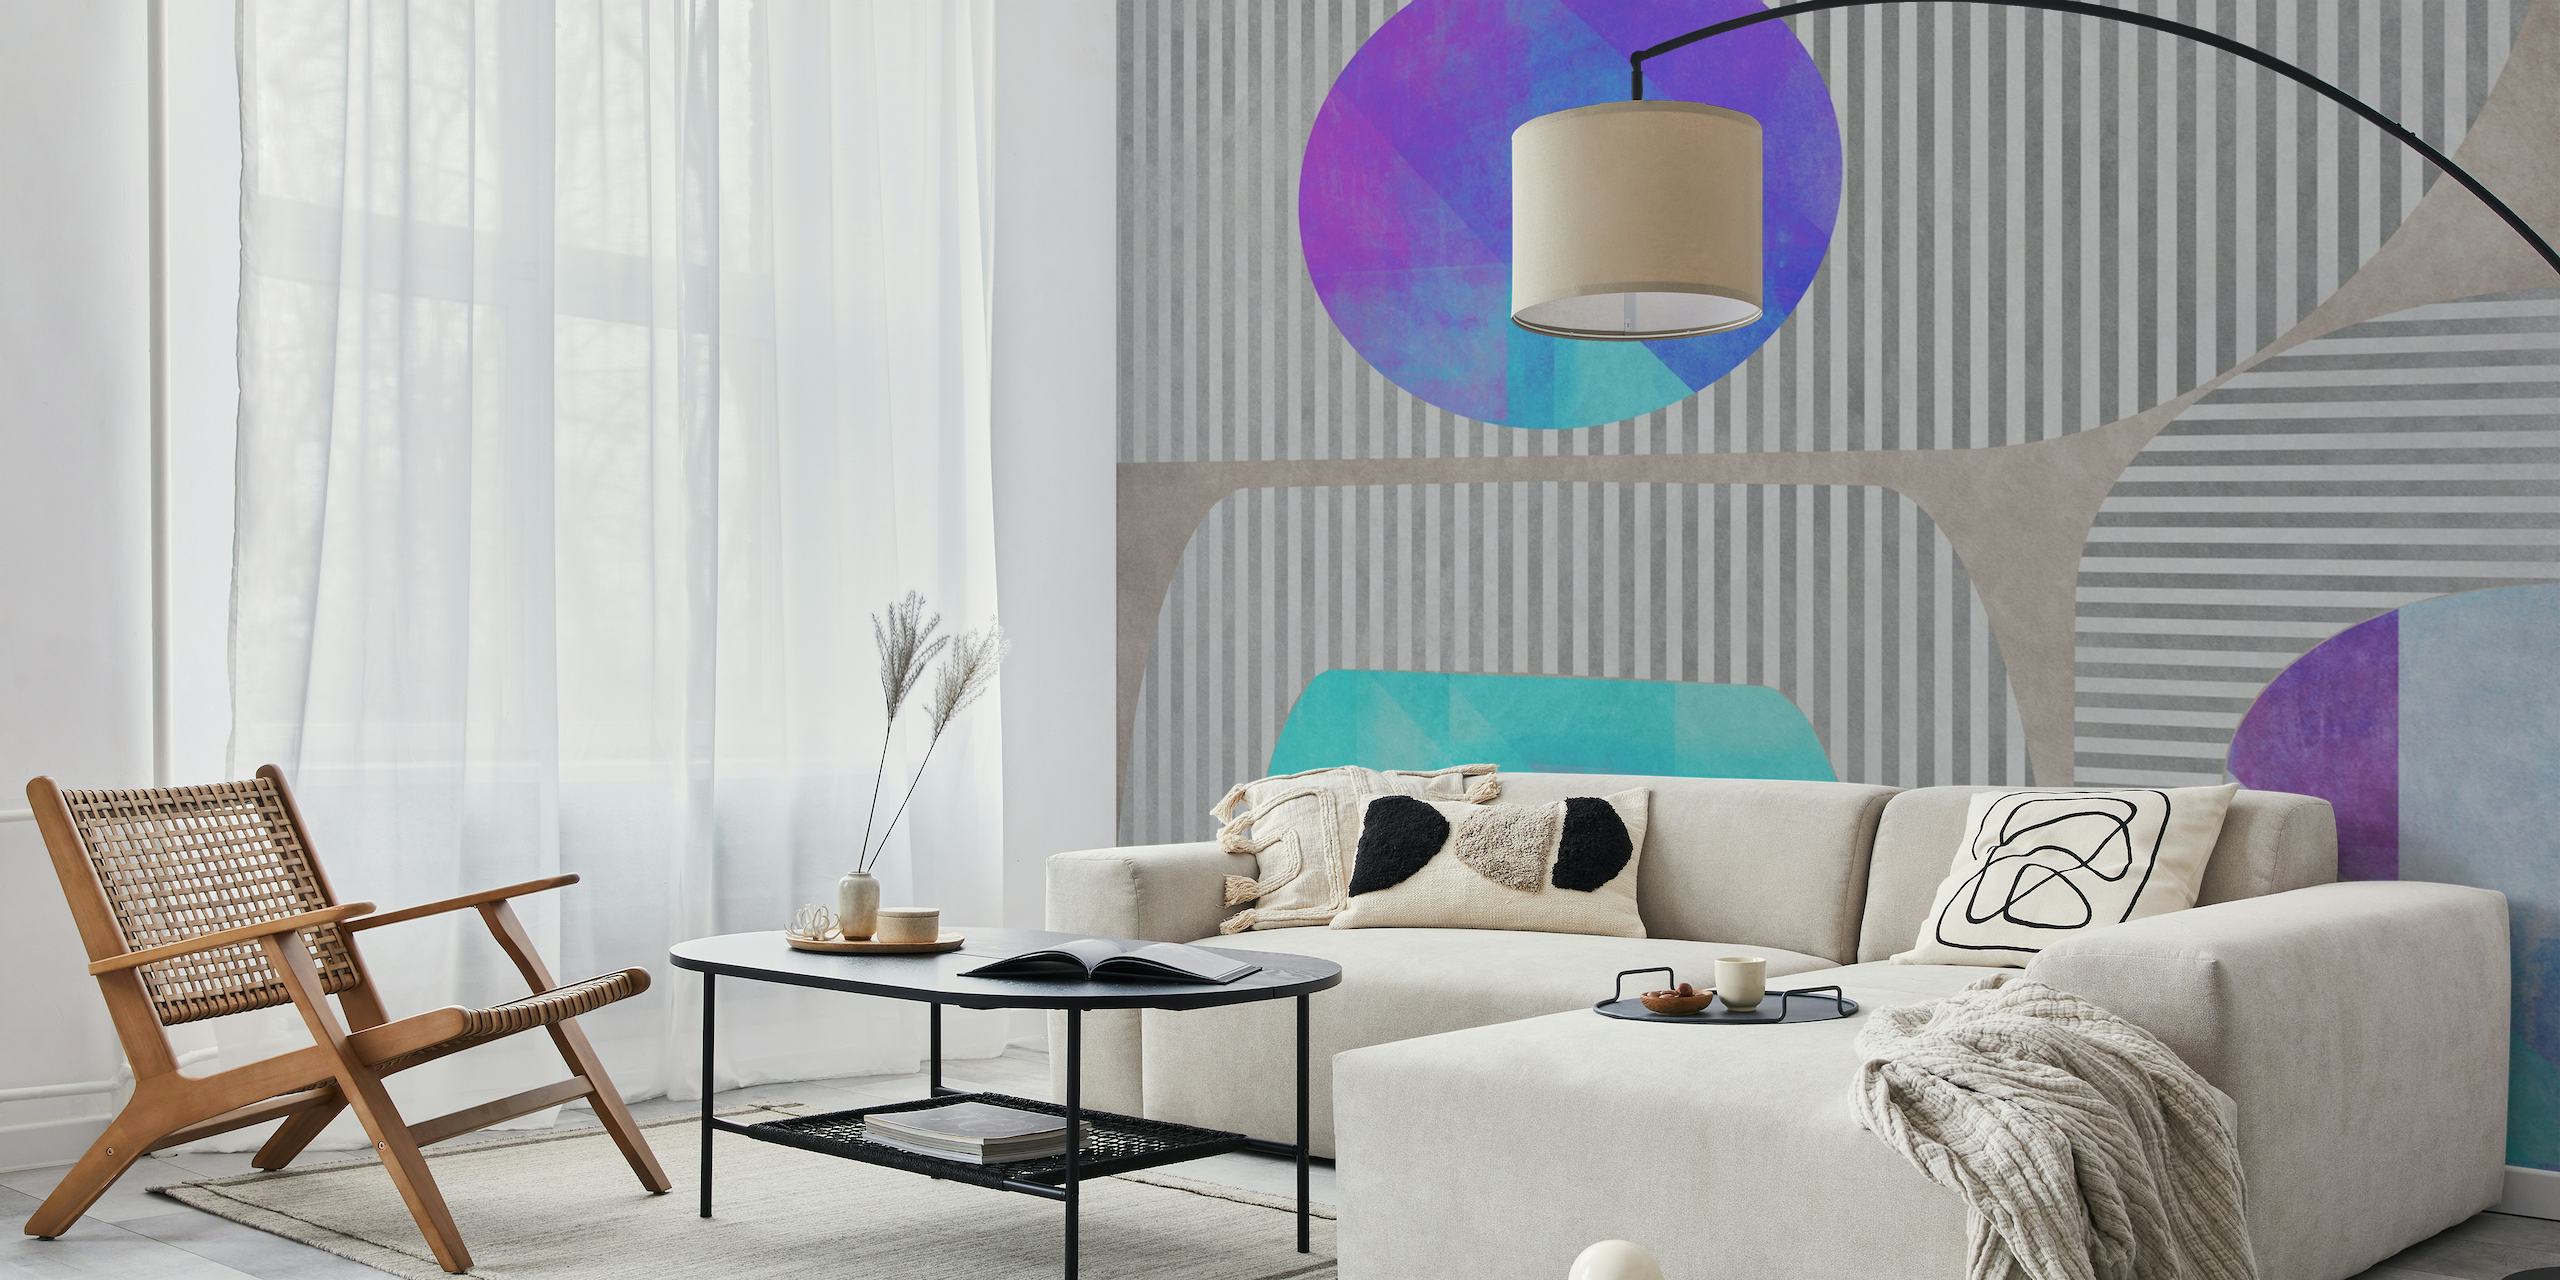 Abstract over Geometric 1 wall mural featuring watercolor circles and geometric shapes in cool tones